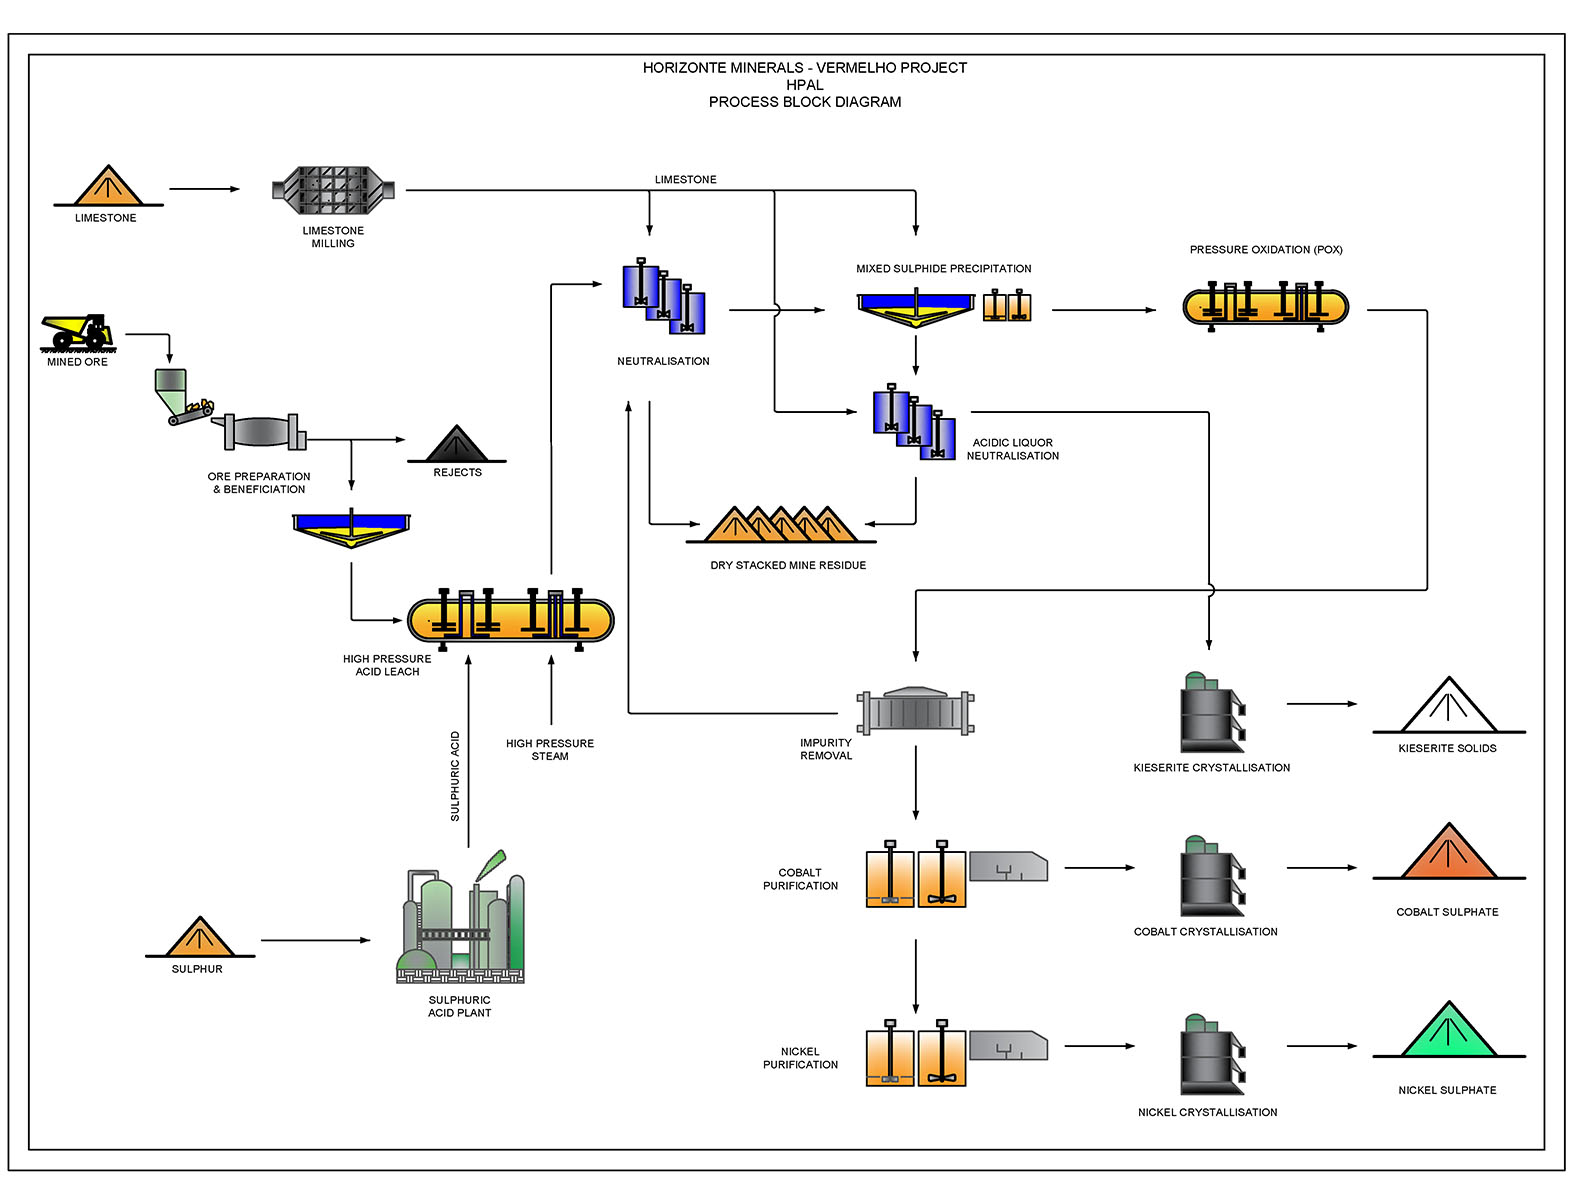 HPAL Process Flow Sheet for the Vermelho Nickel Project